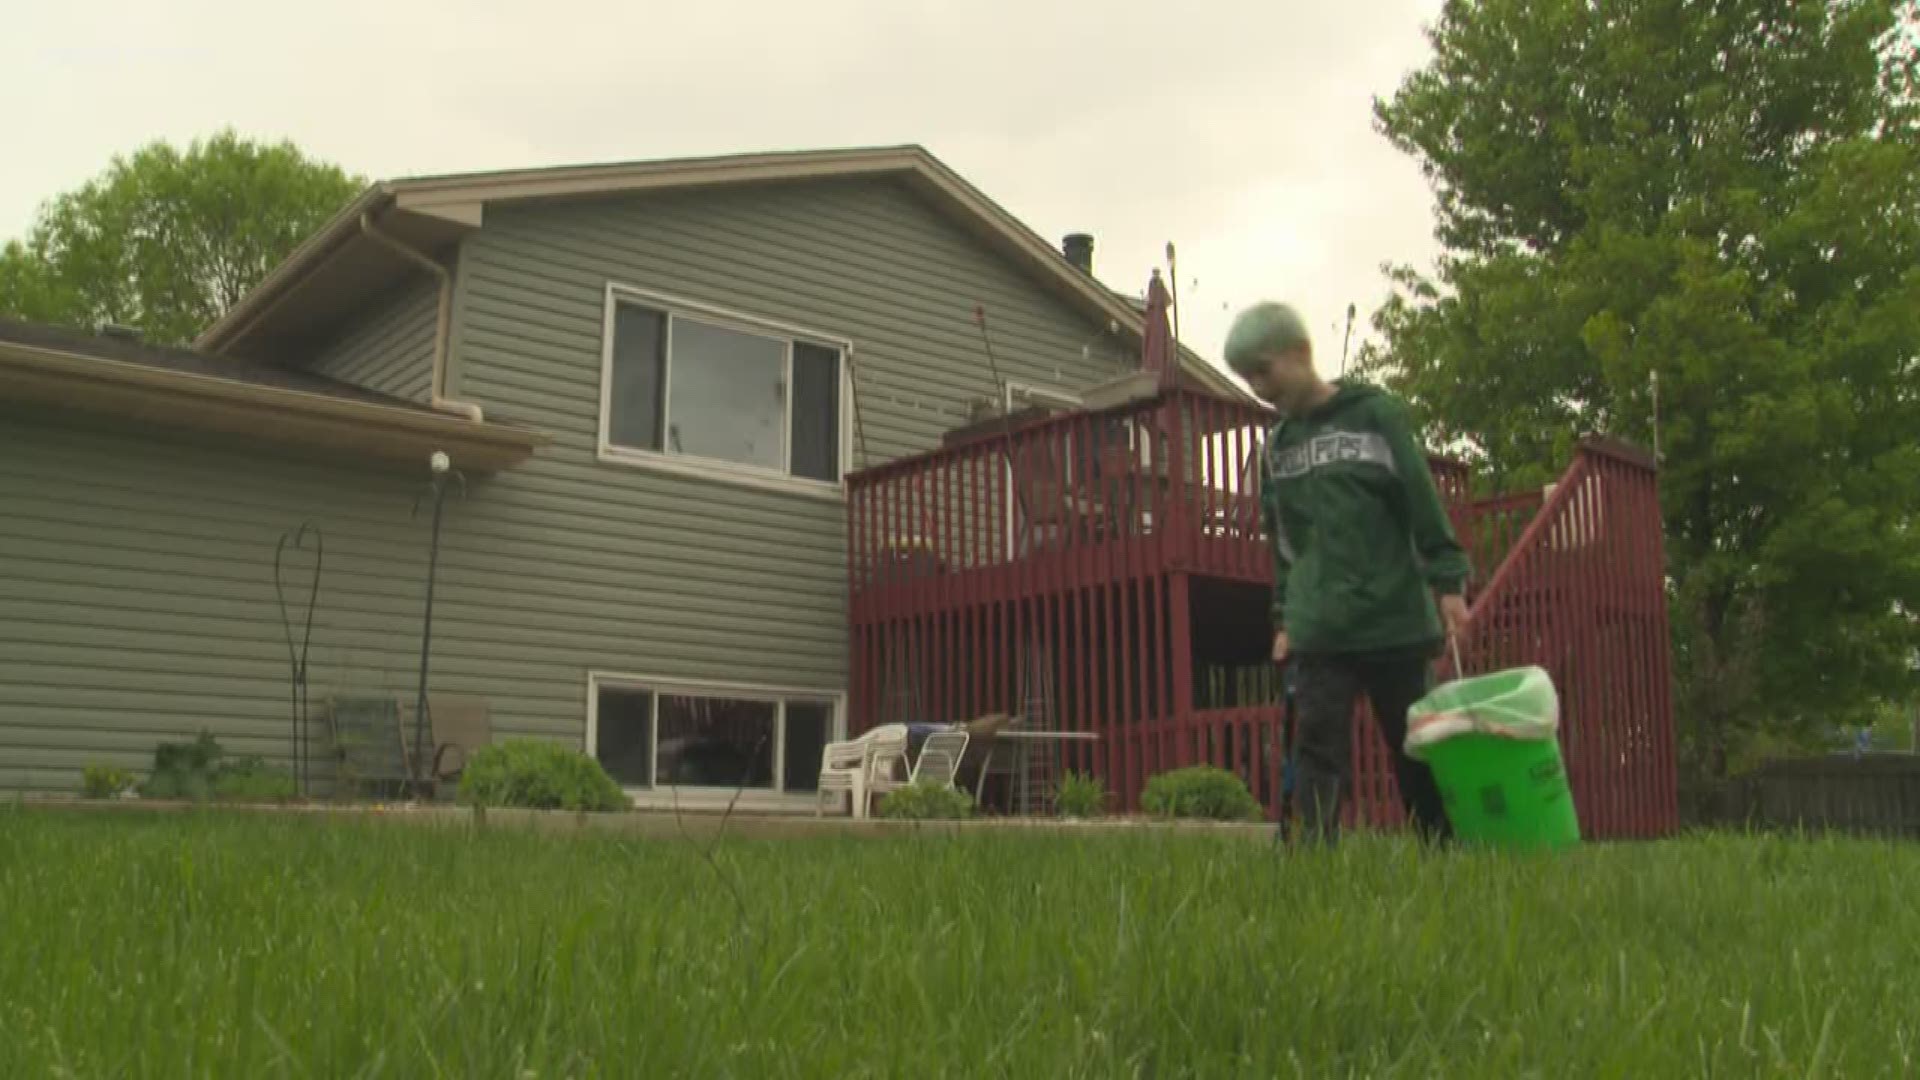 A 10-year-old in Cottage Grove saw an opportunity in his neighborhood - and turned it into a side hustle! Silas Ruprecht has been picking up dog waste, and now has a regular list of clients. He charges $5 a week per dog, and has made around $1,800 so far!